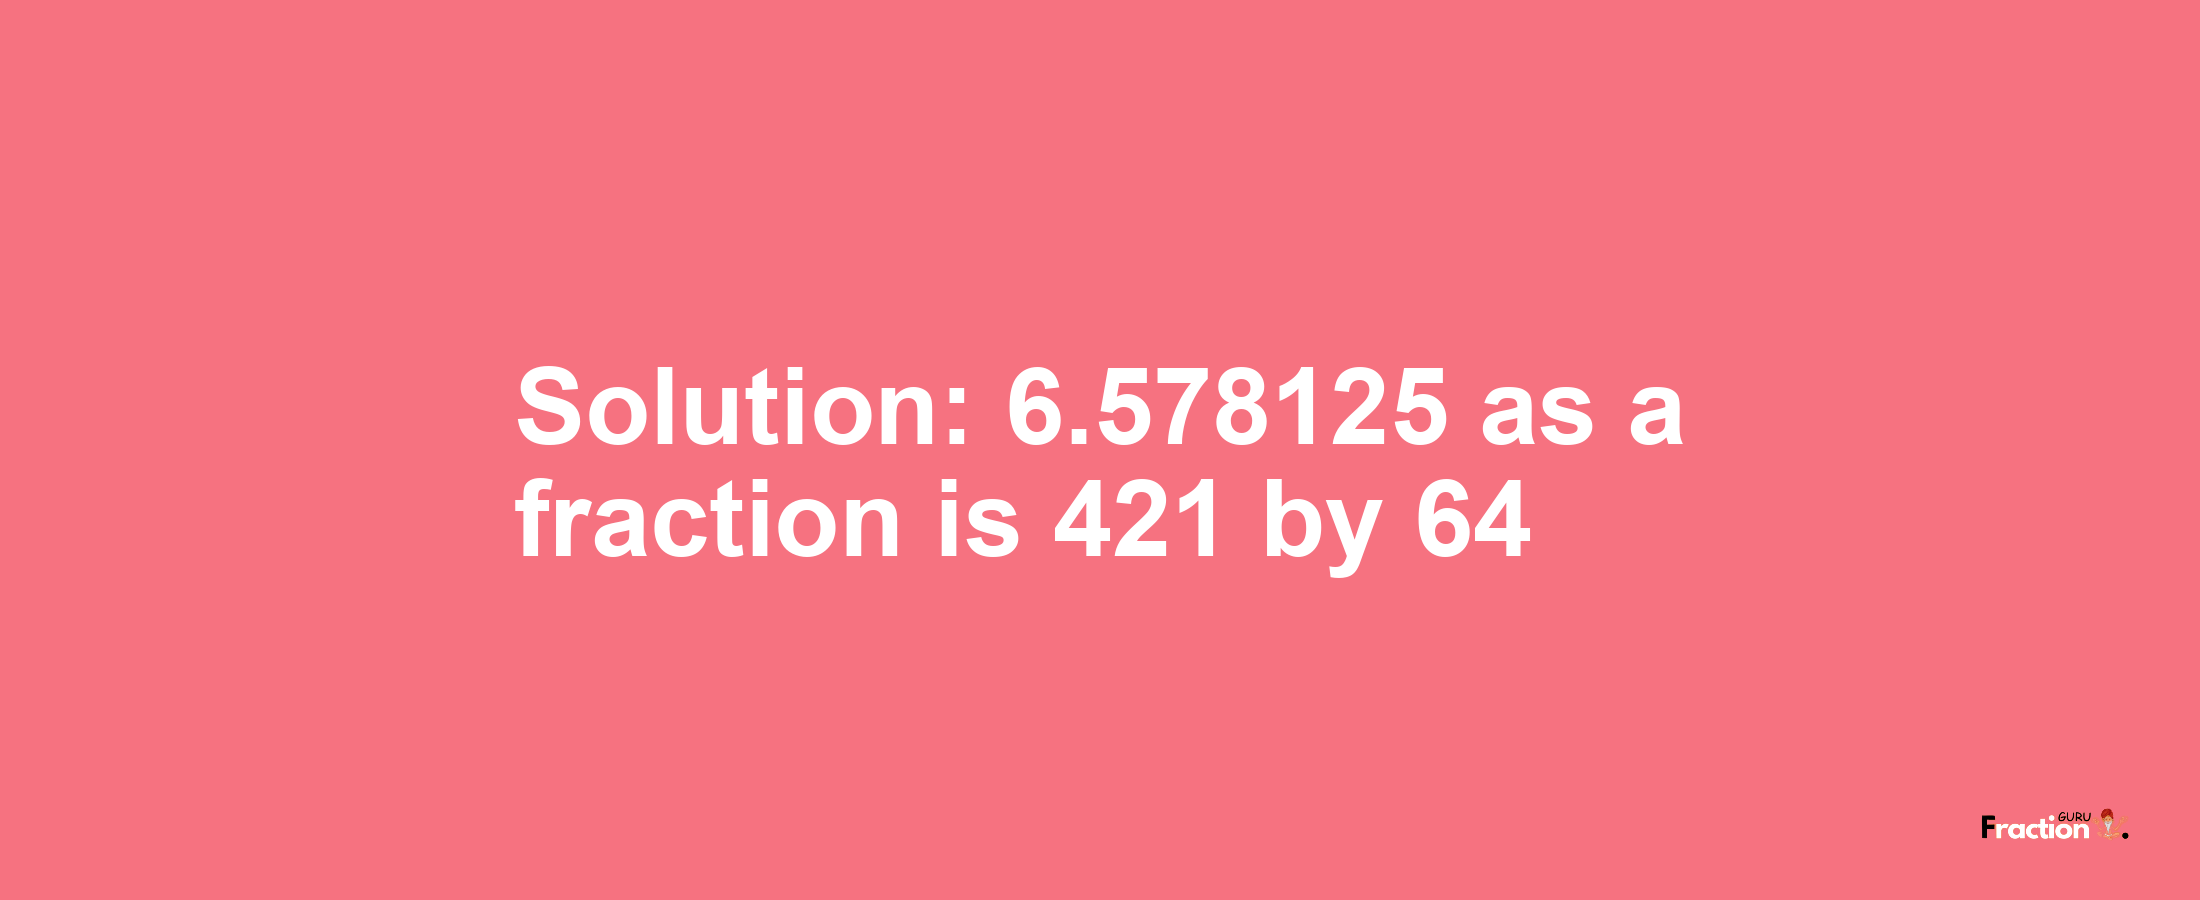 Solution:6.578125 as a fraction is 421/64